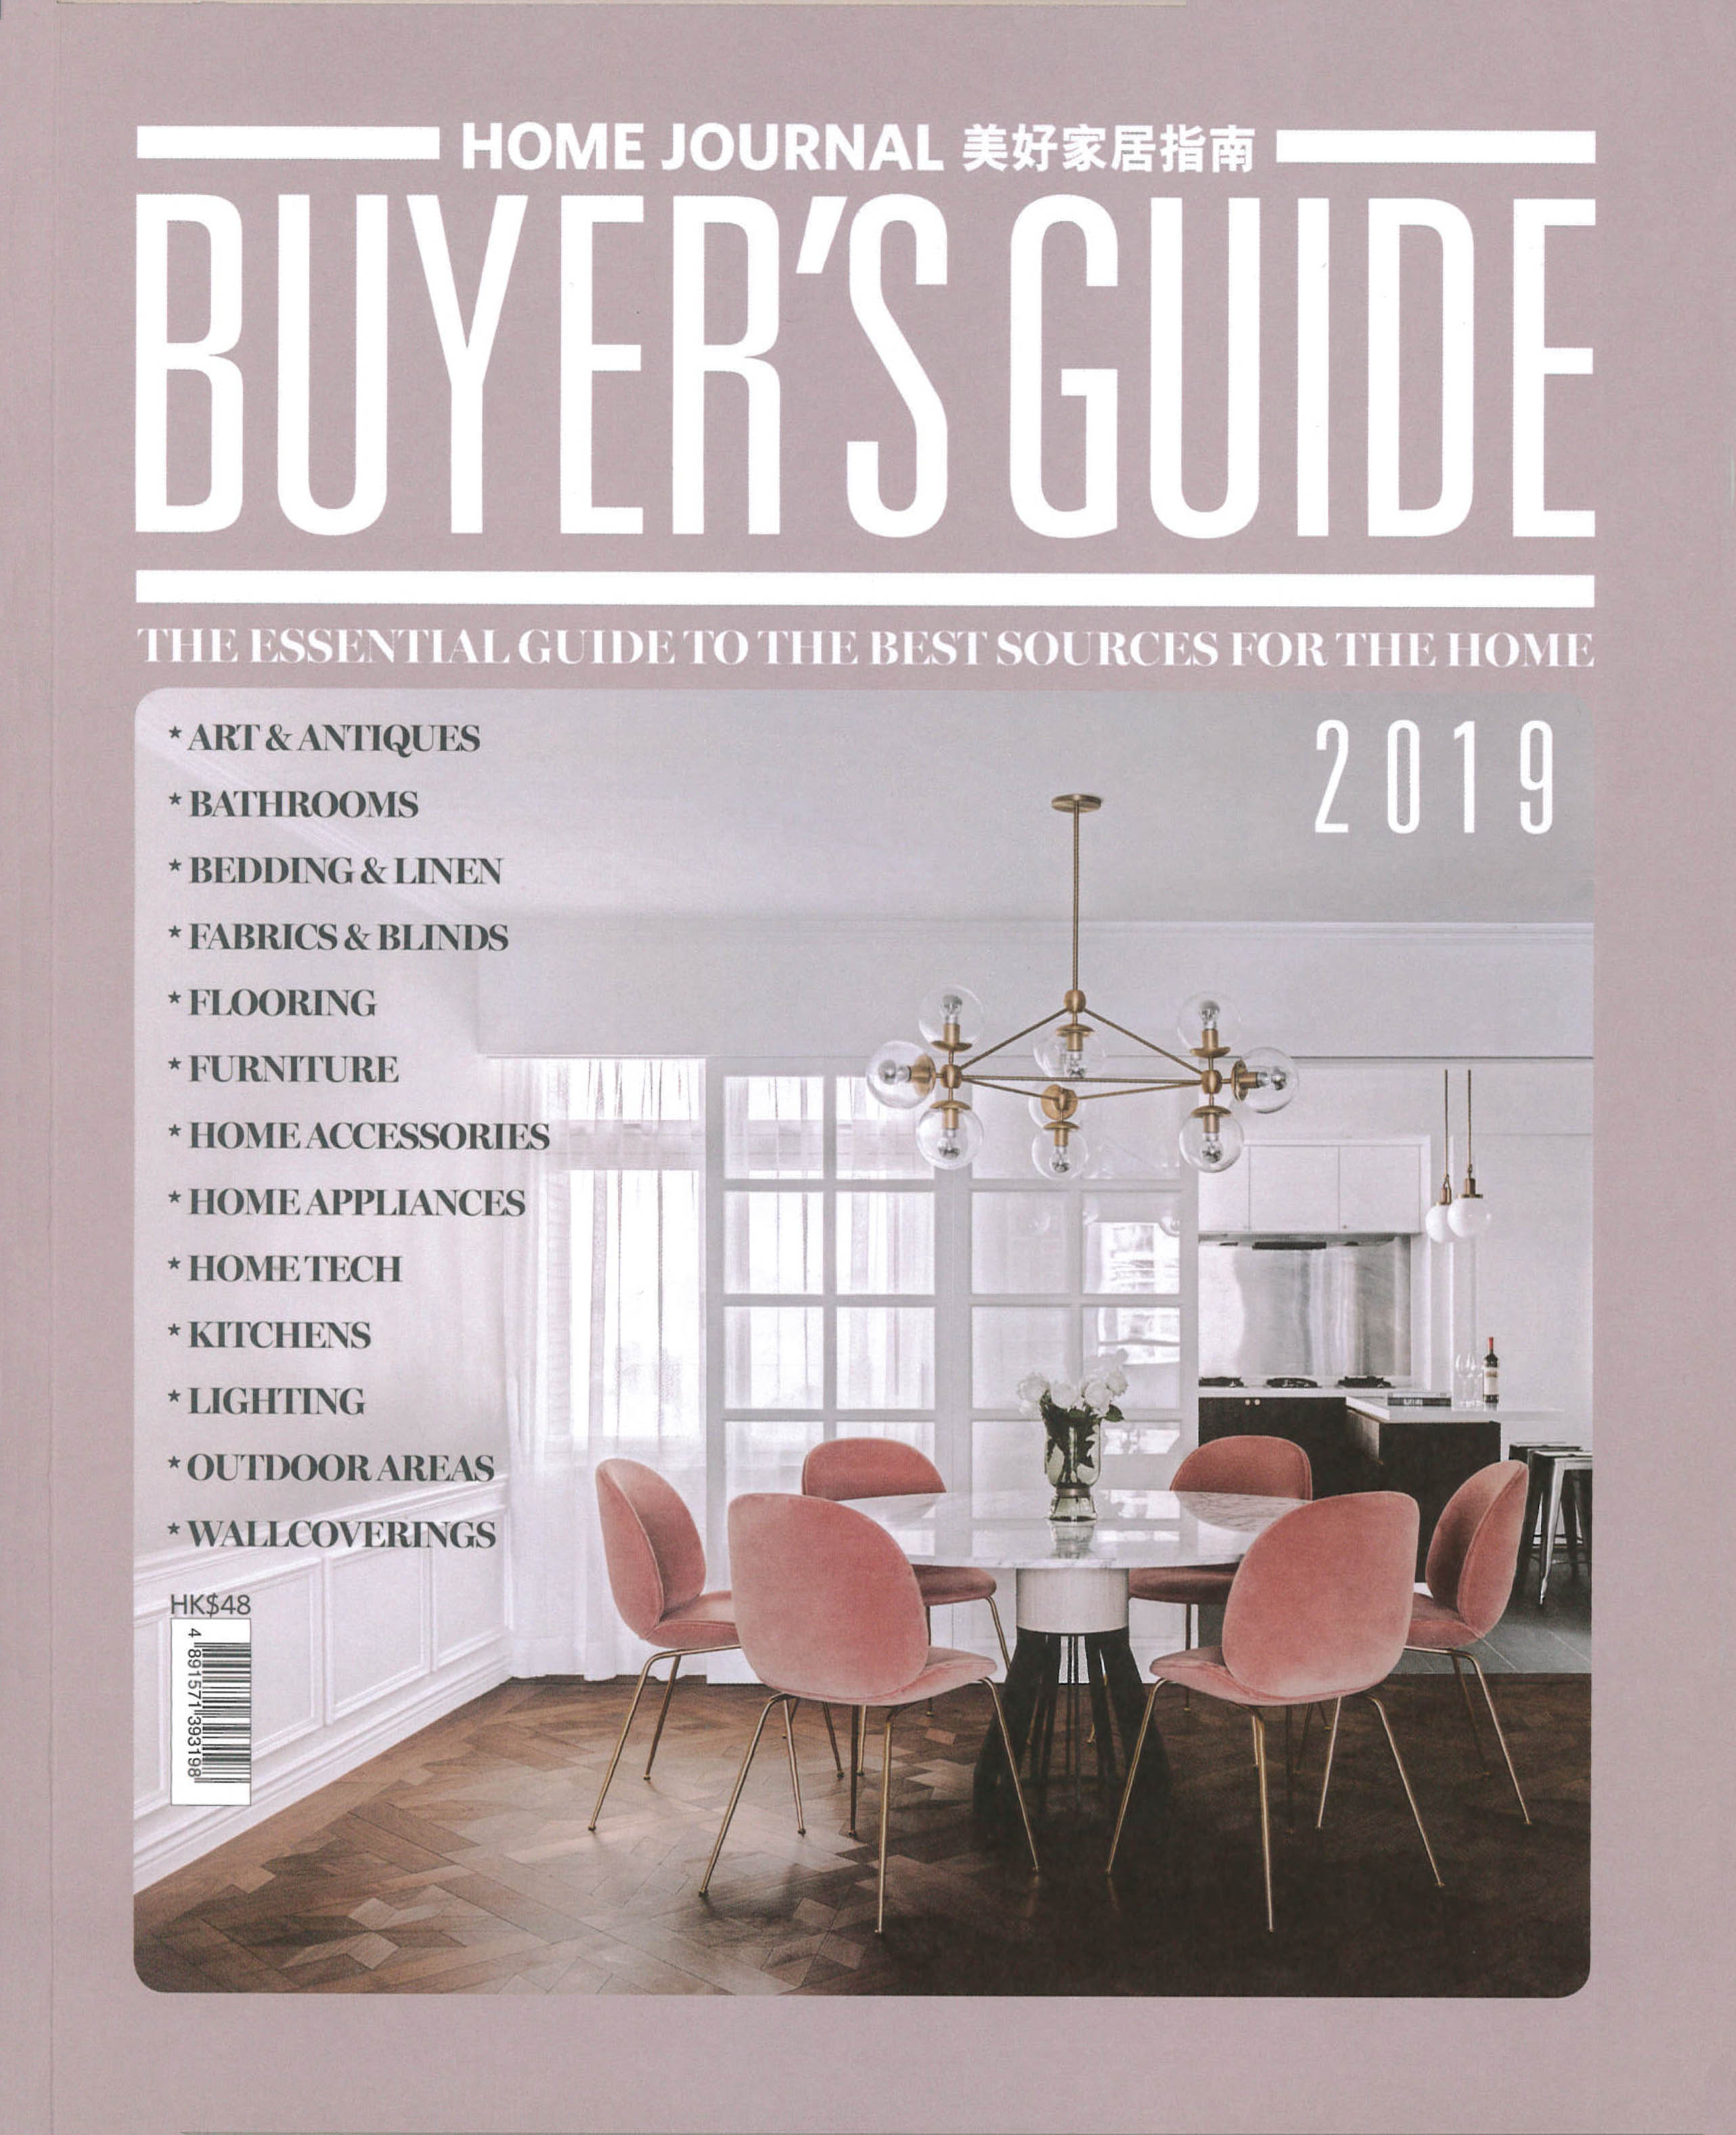 Home Journal Buyer’s Guide 2019